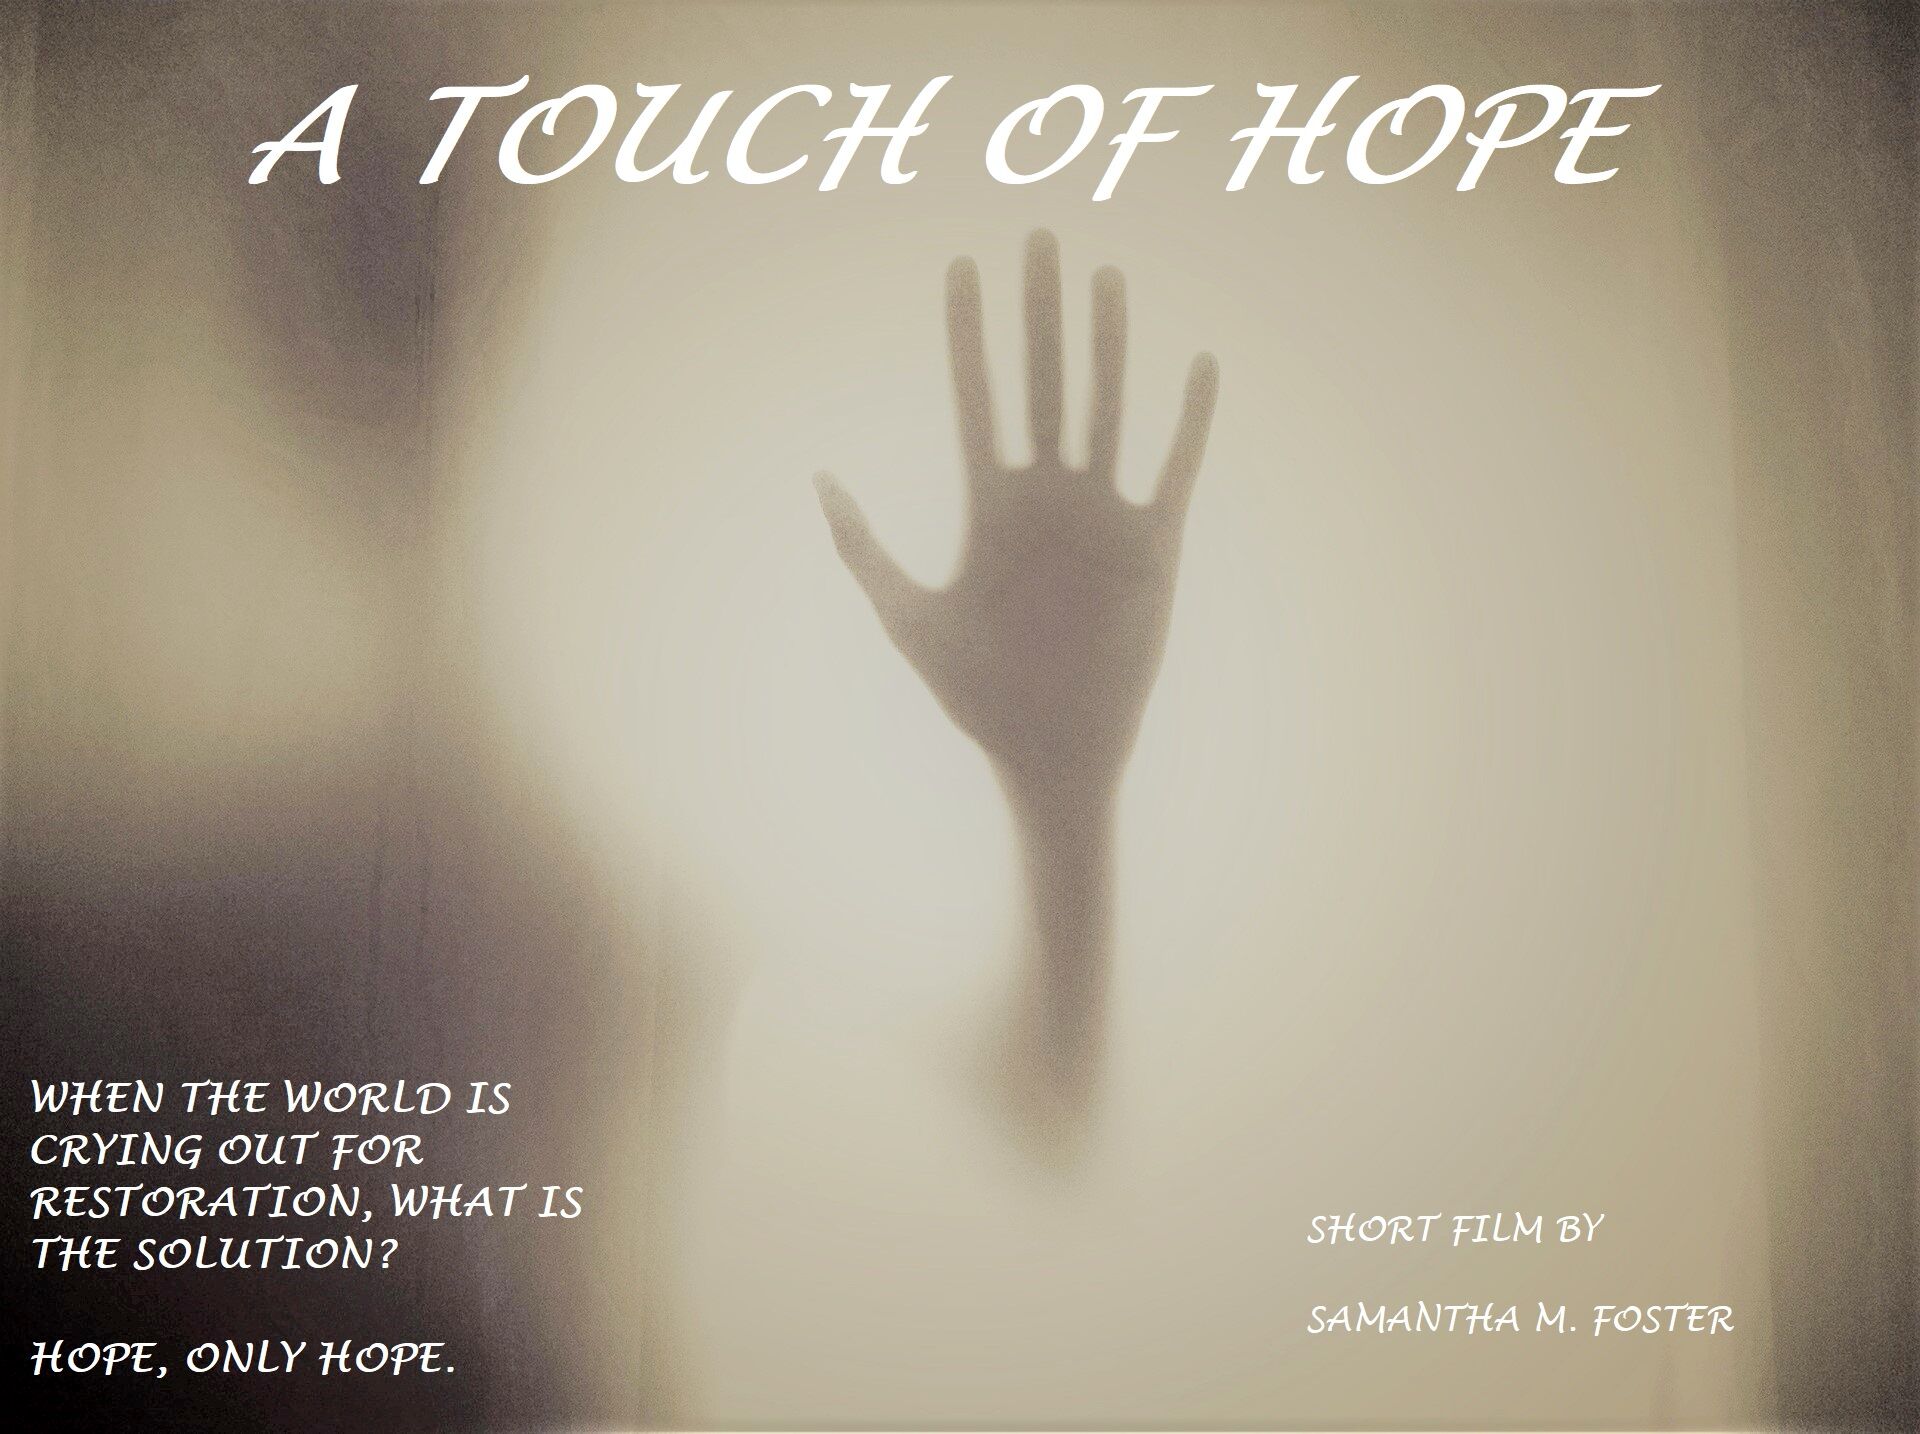 A TOUCH OF HOPE